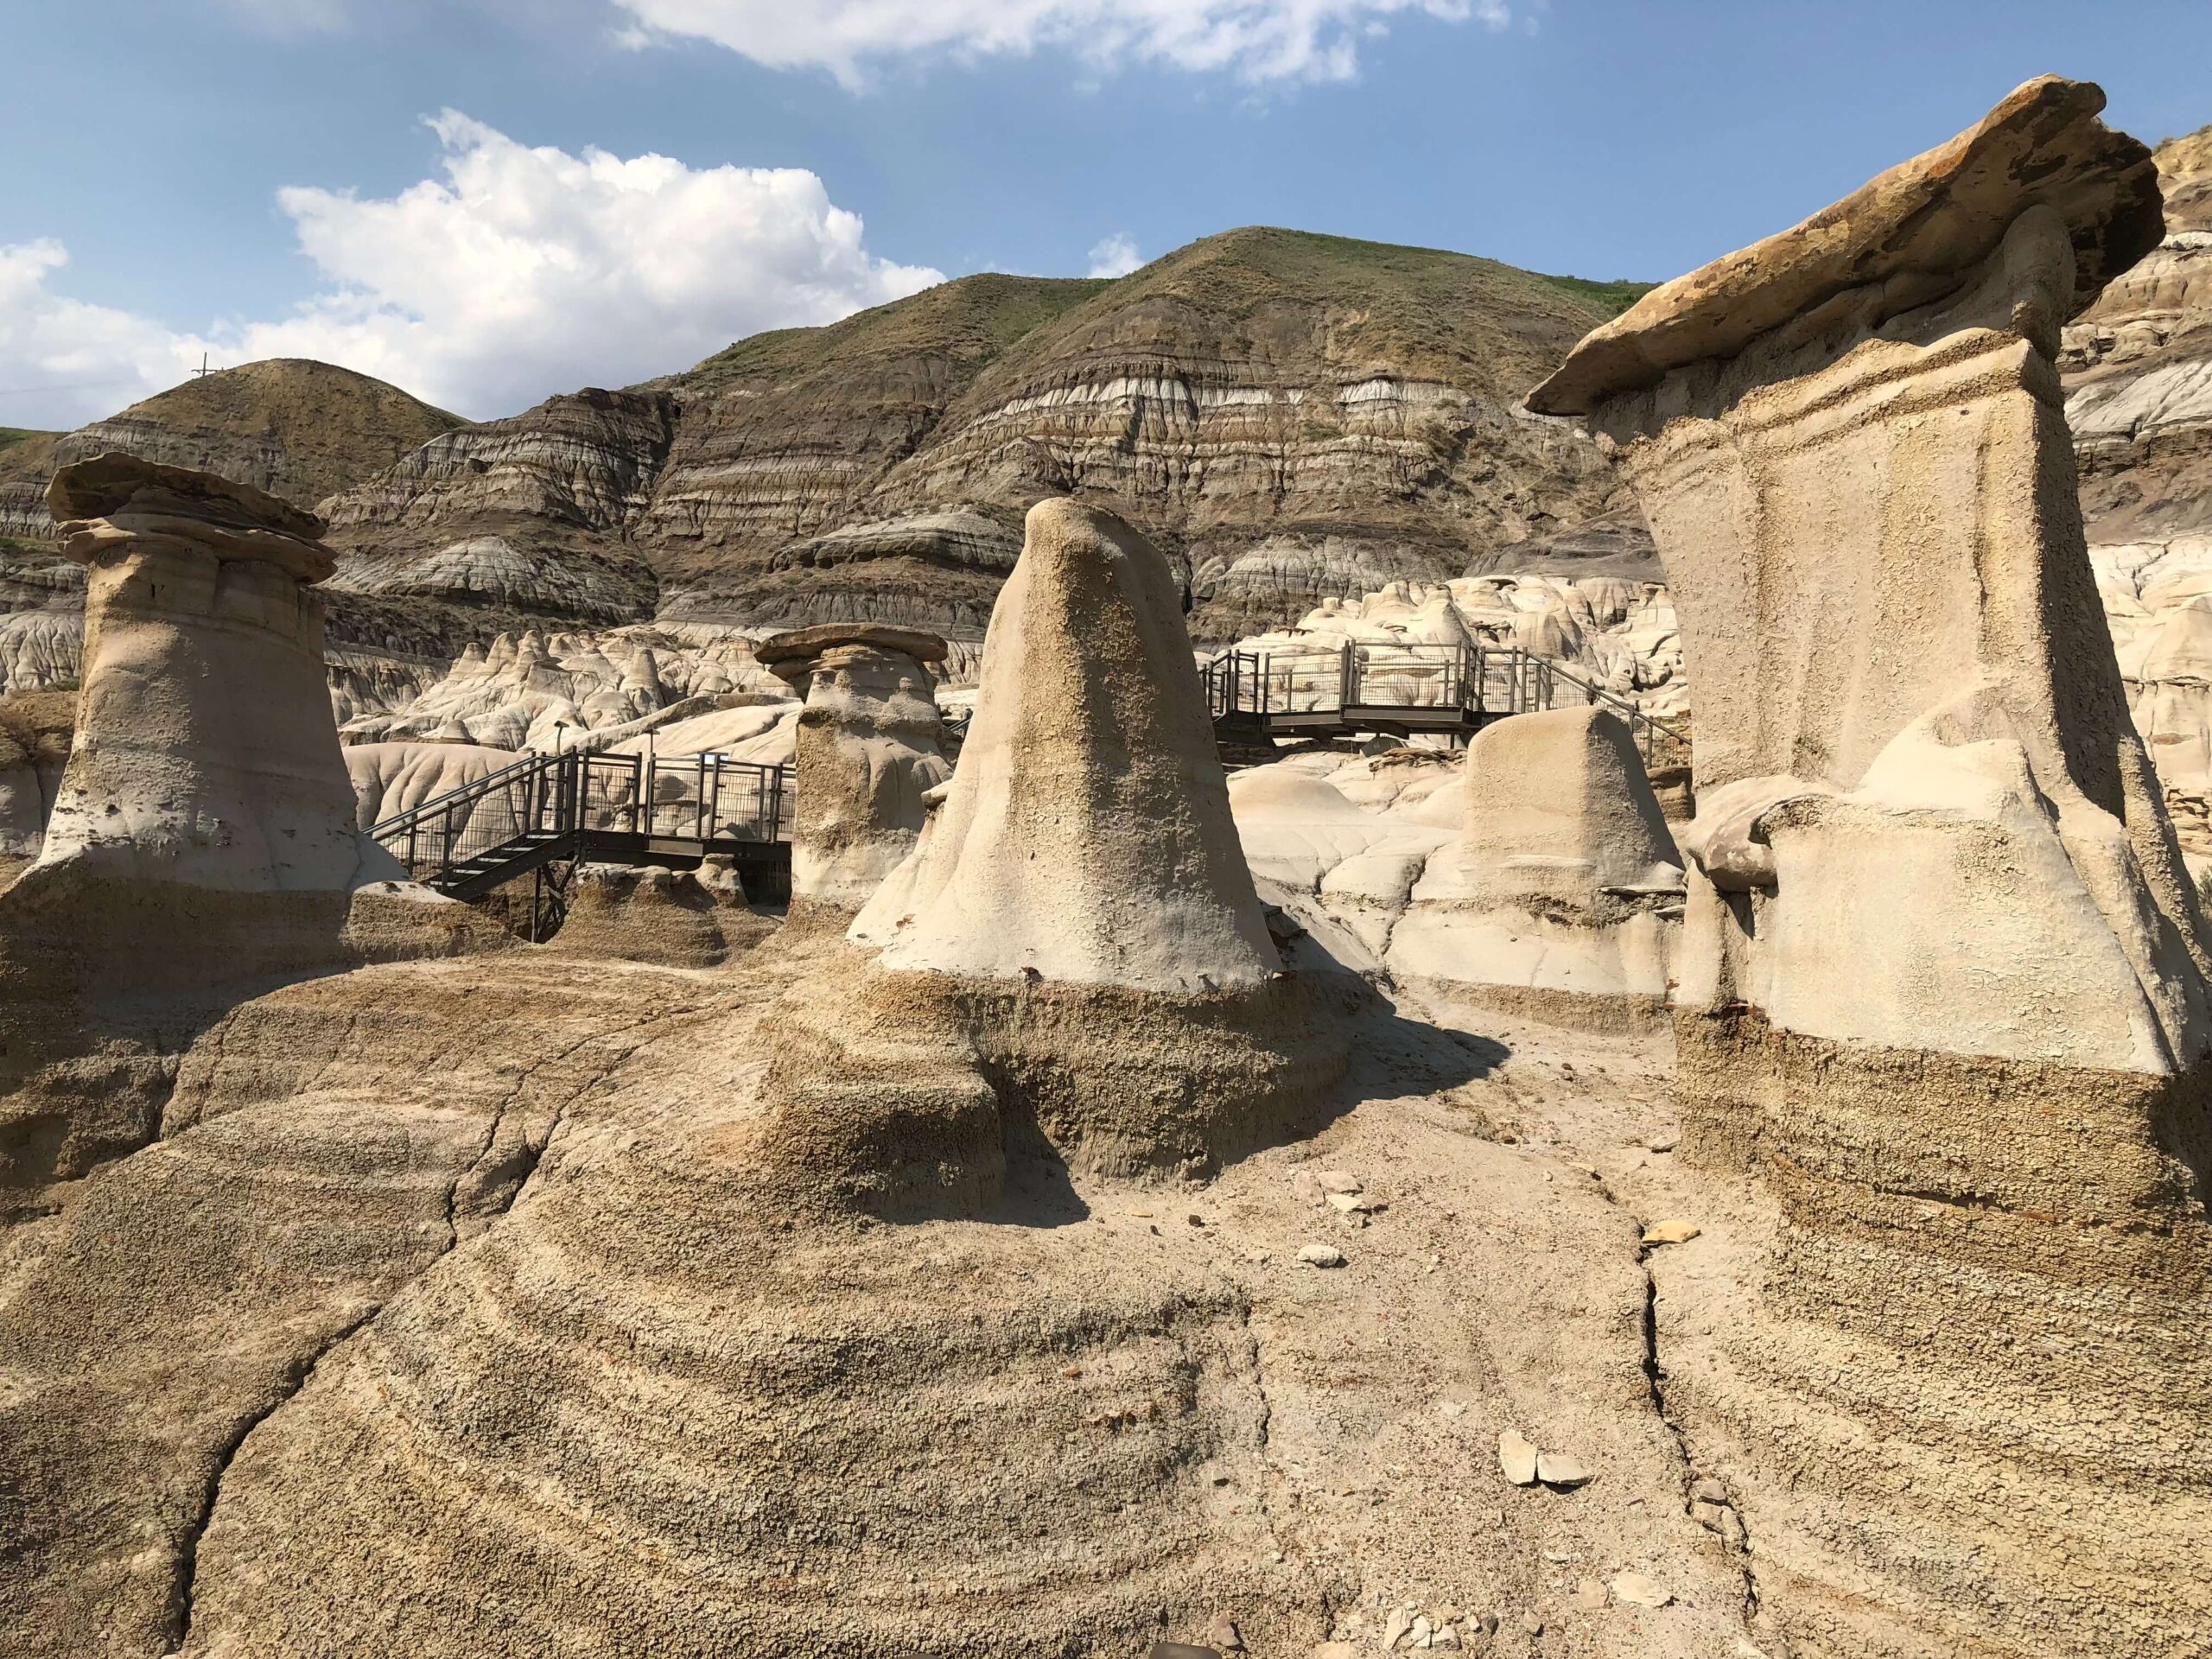 Nature's Sculptures in the Canadian Badlands are a Spectacle Your Grizzly Classic Men's Artistic Gymnastics Team Won't Forget.